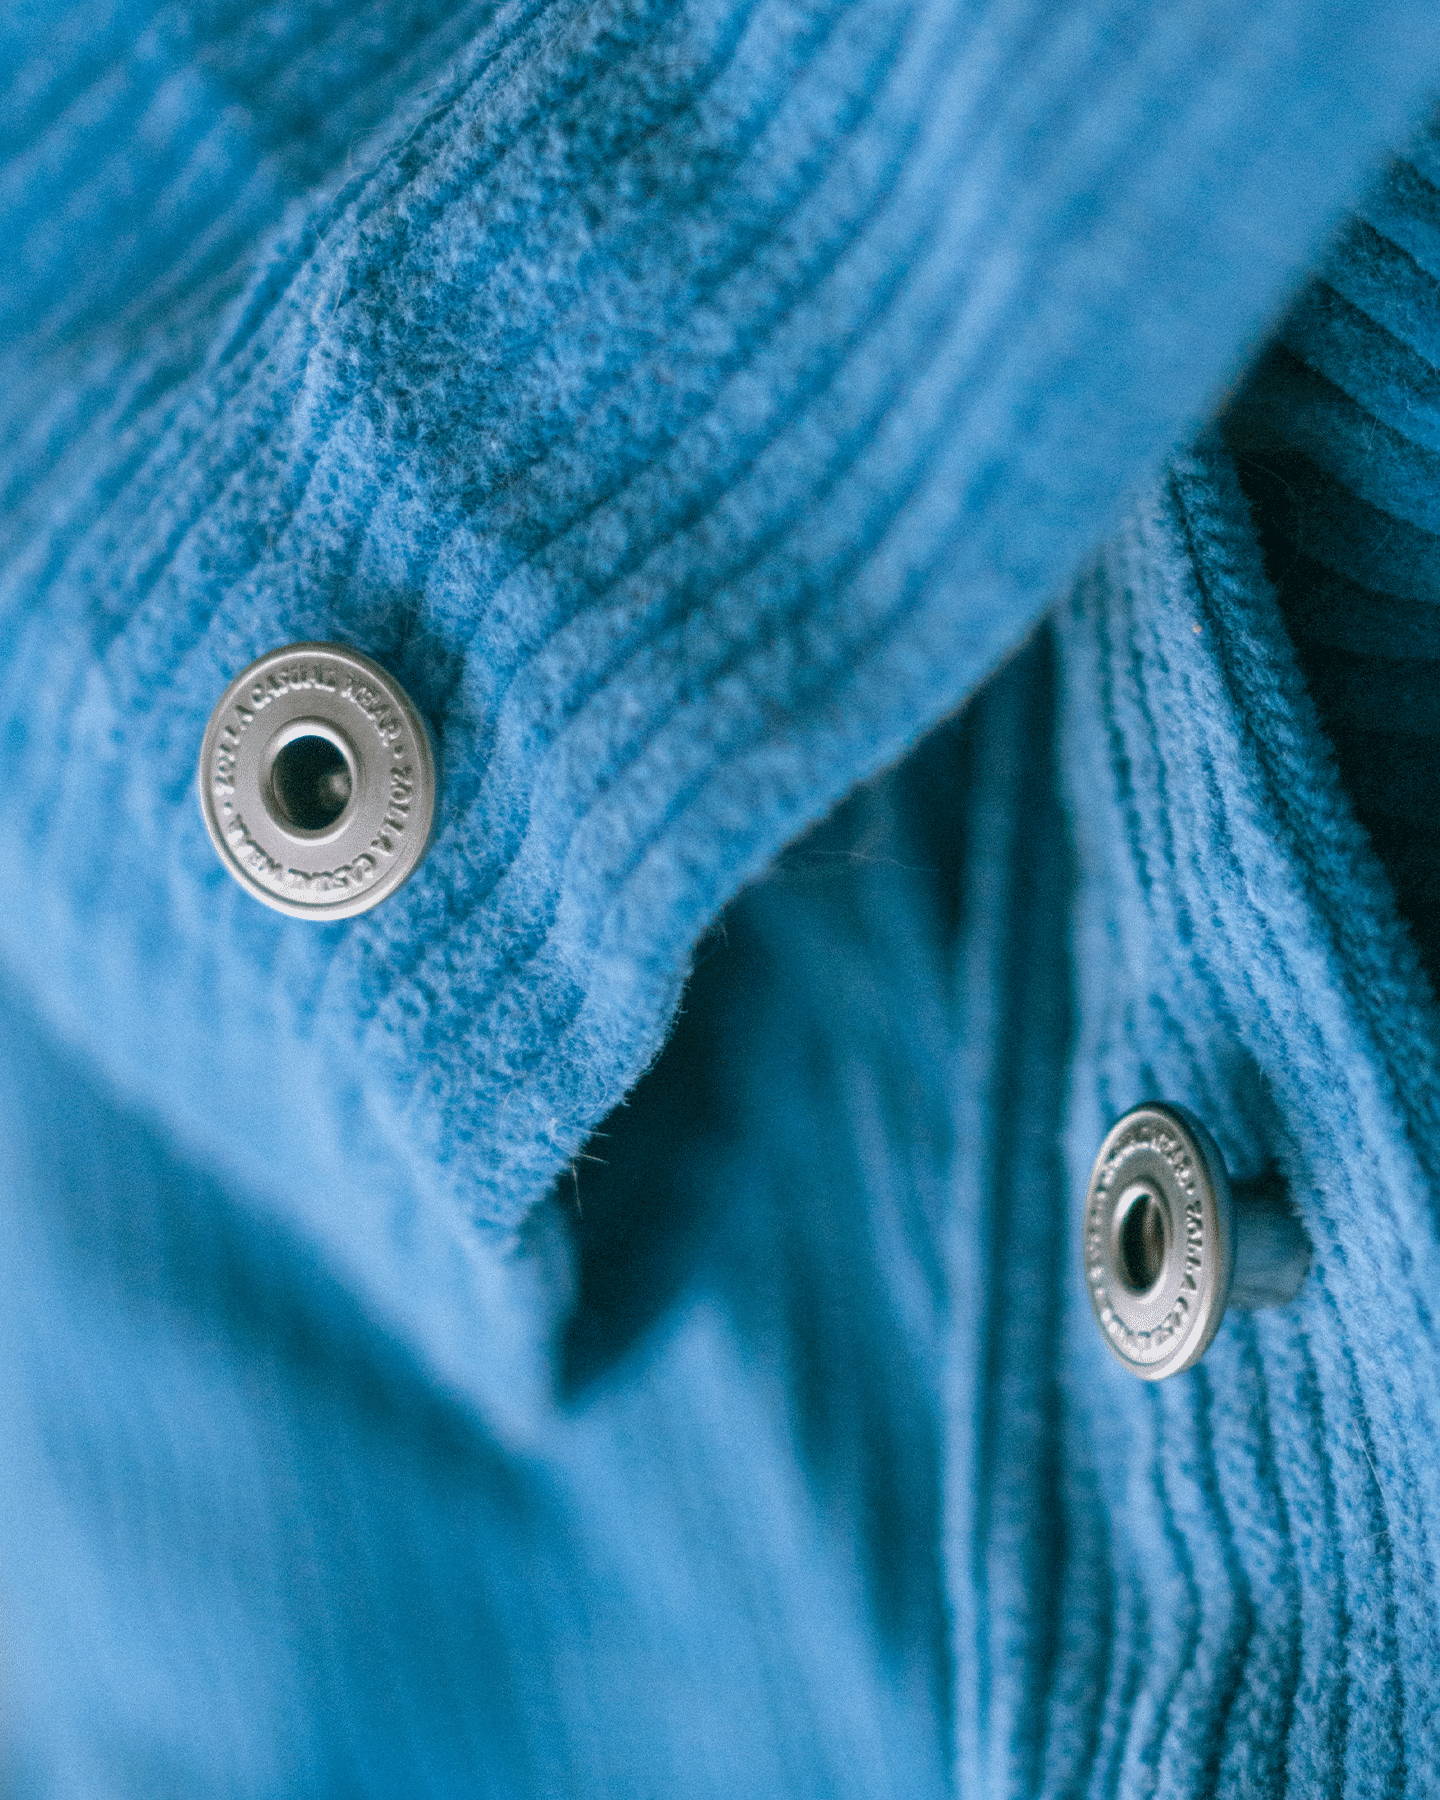 Here's a guide to improving your skills by learning to fix a button on your favourite shirt and pants 